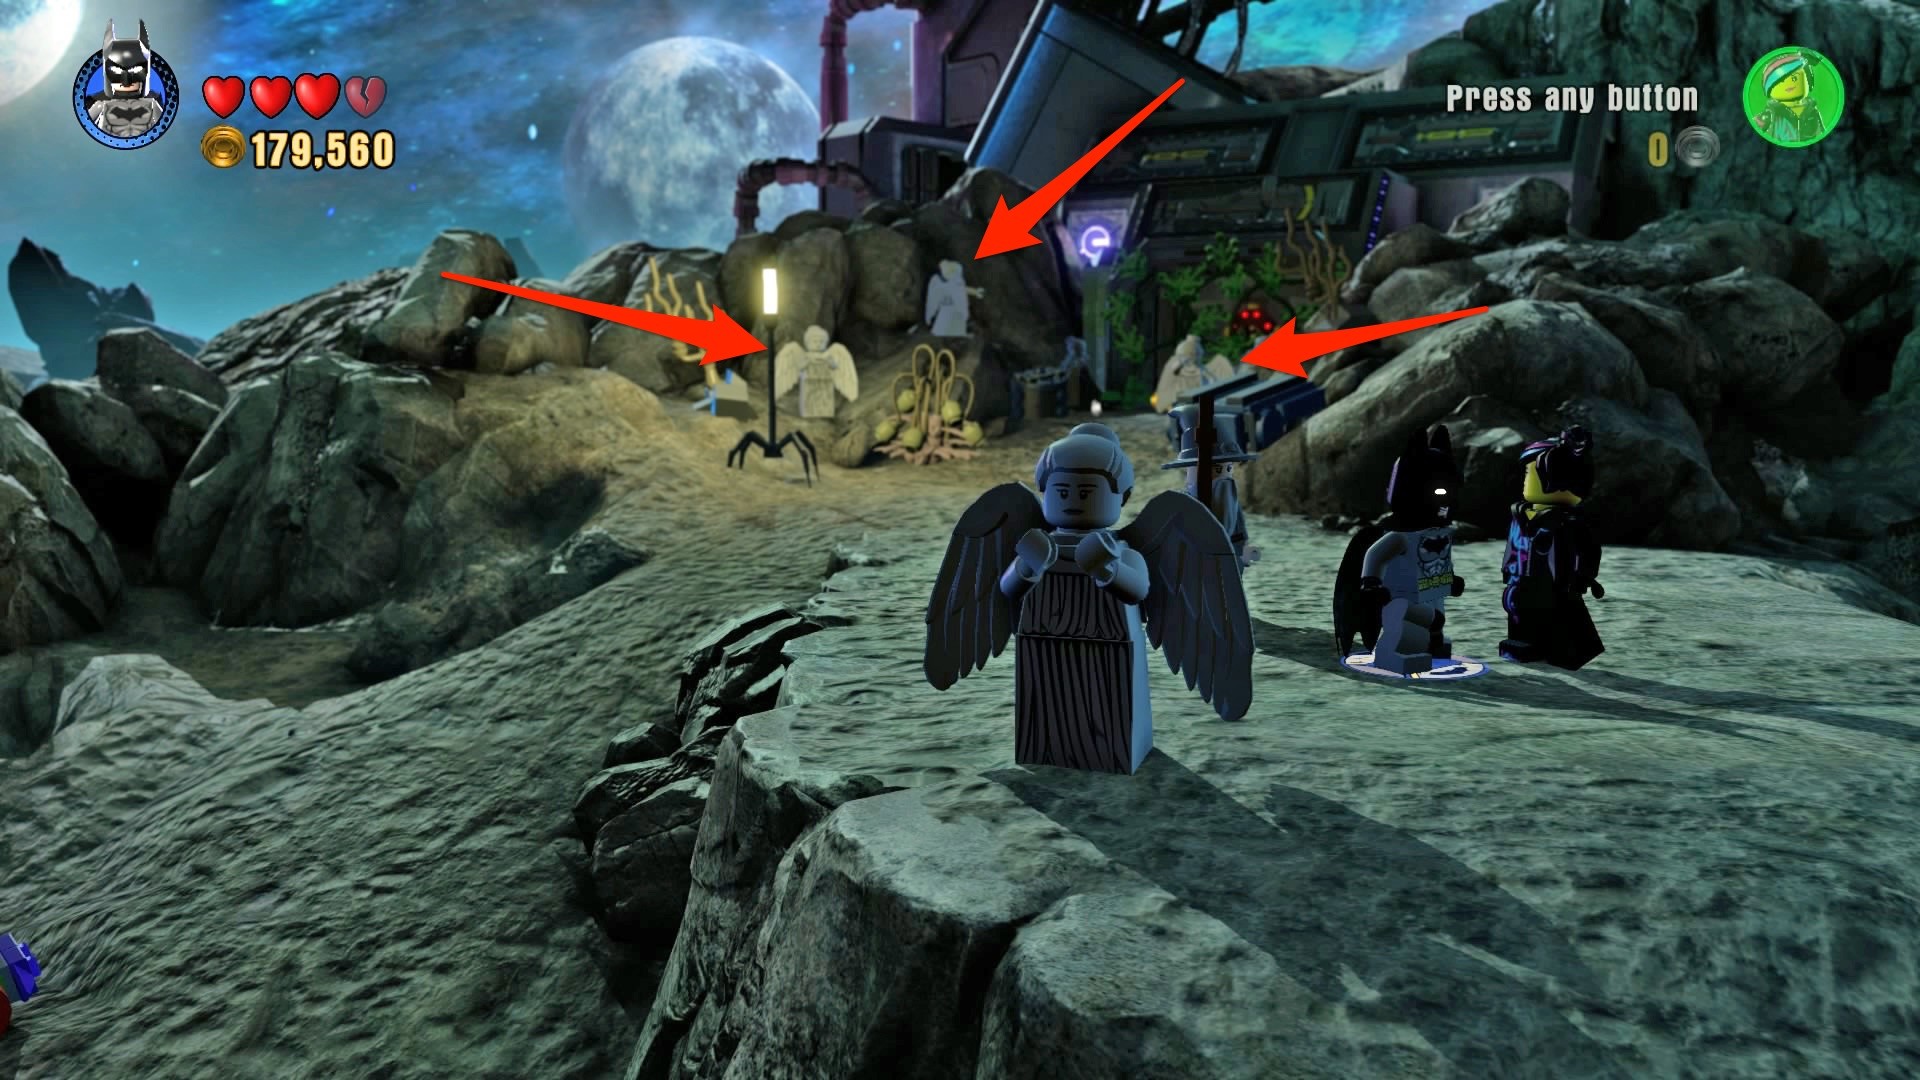 1920x1080 Doctor who weeping angels lego dimensions